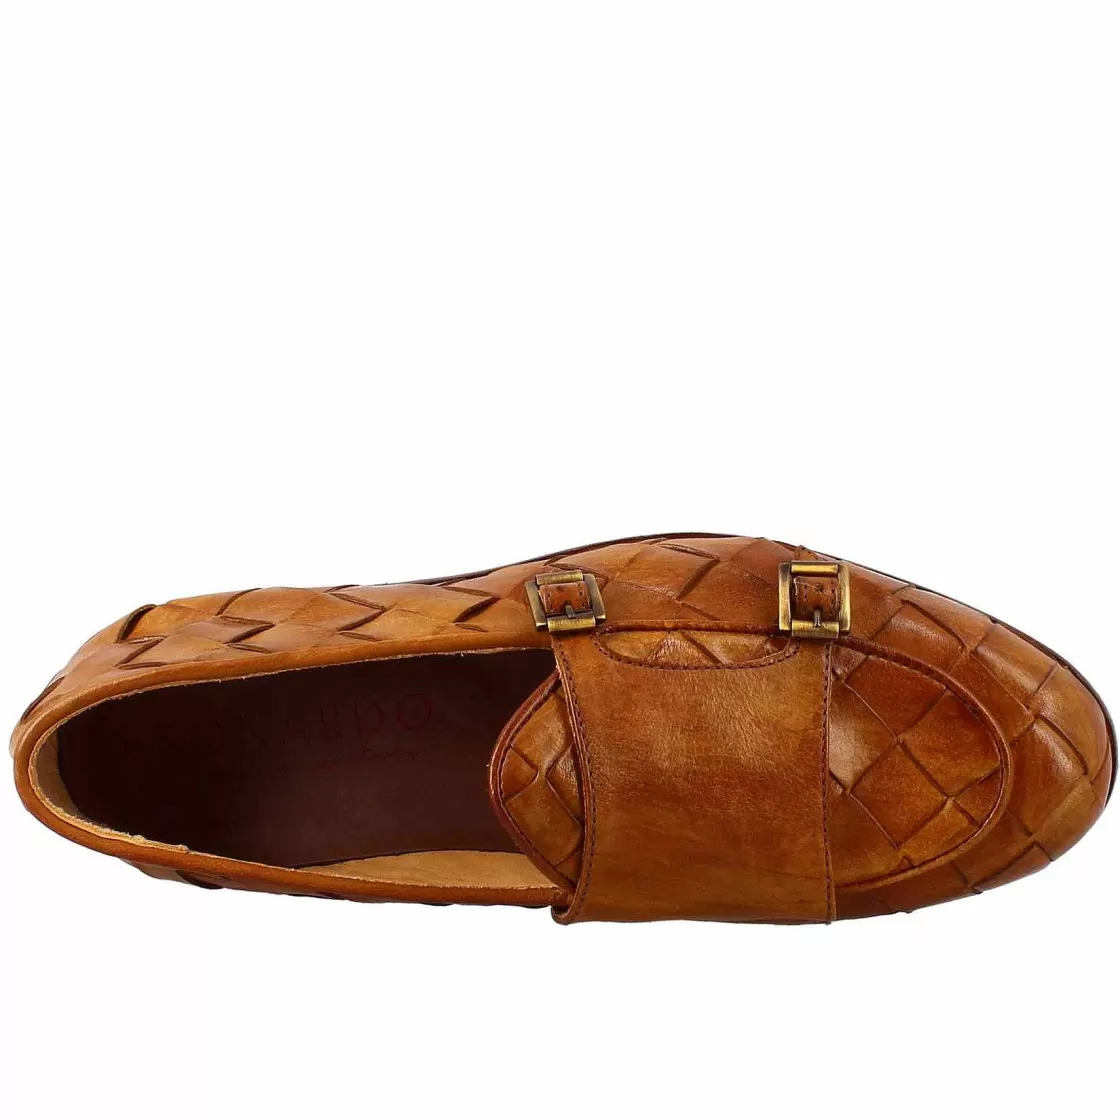 Leonardo Brown Moccasin With Double Golden Buckle For Men In Woven Leather Flash Sale